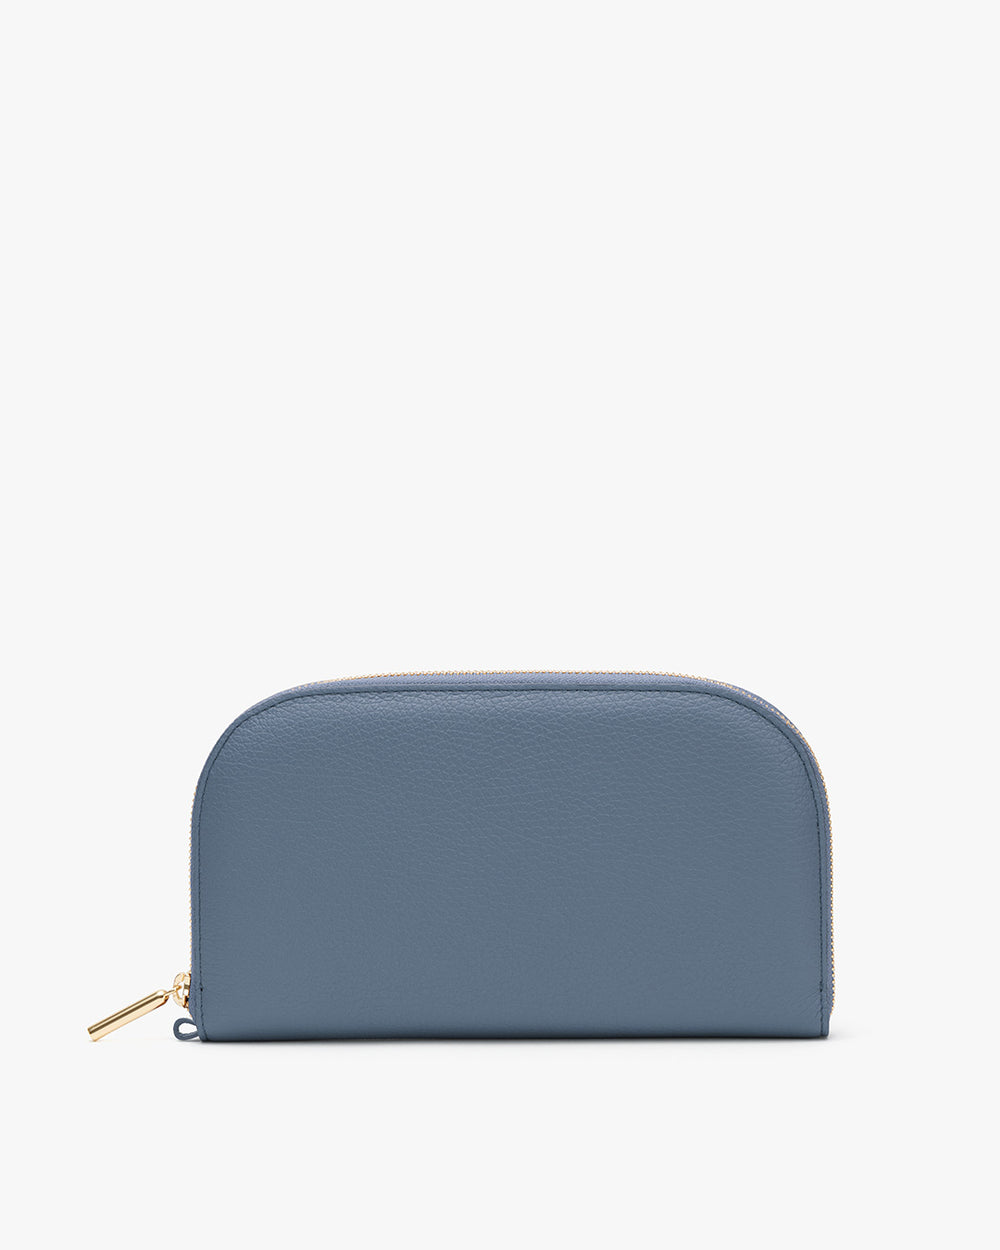 Zippered pouch on a plain background.